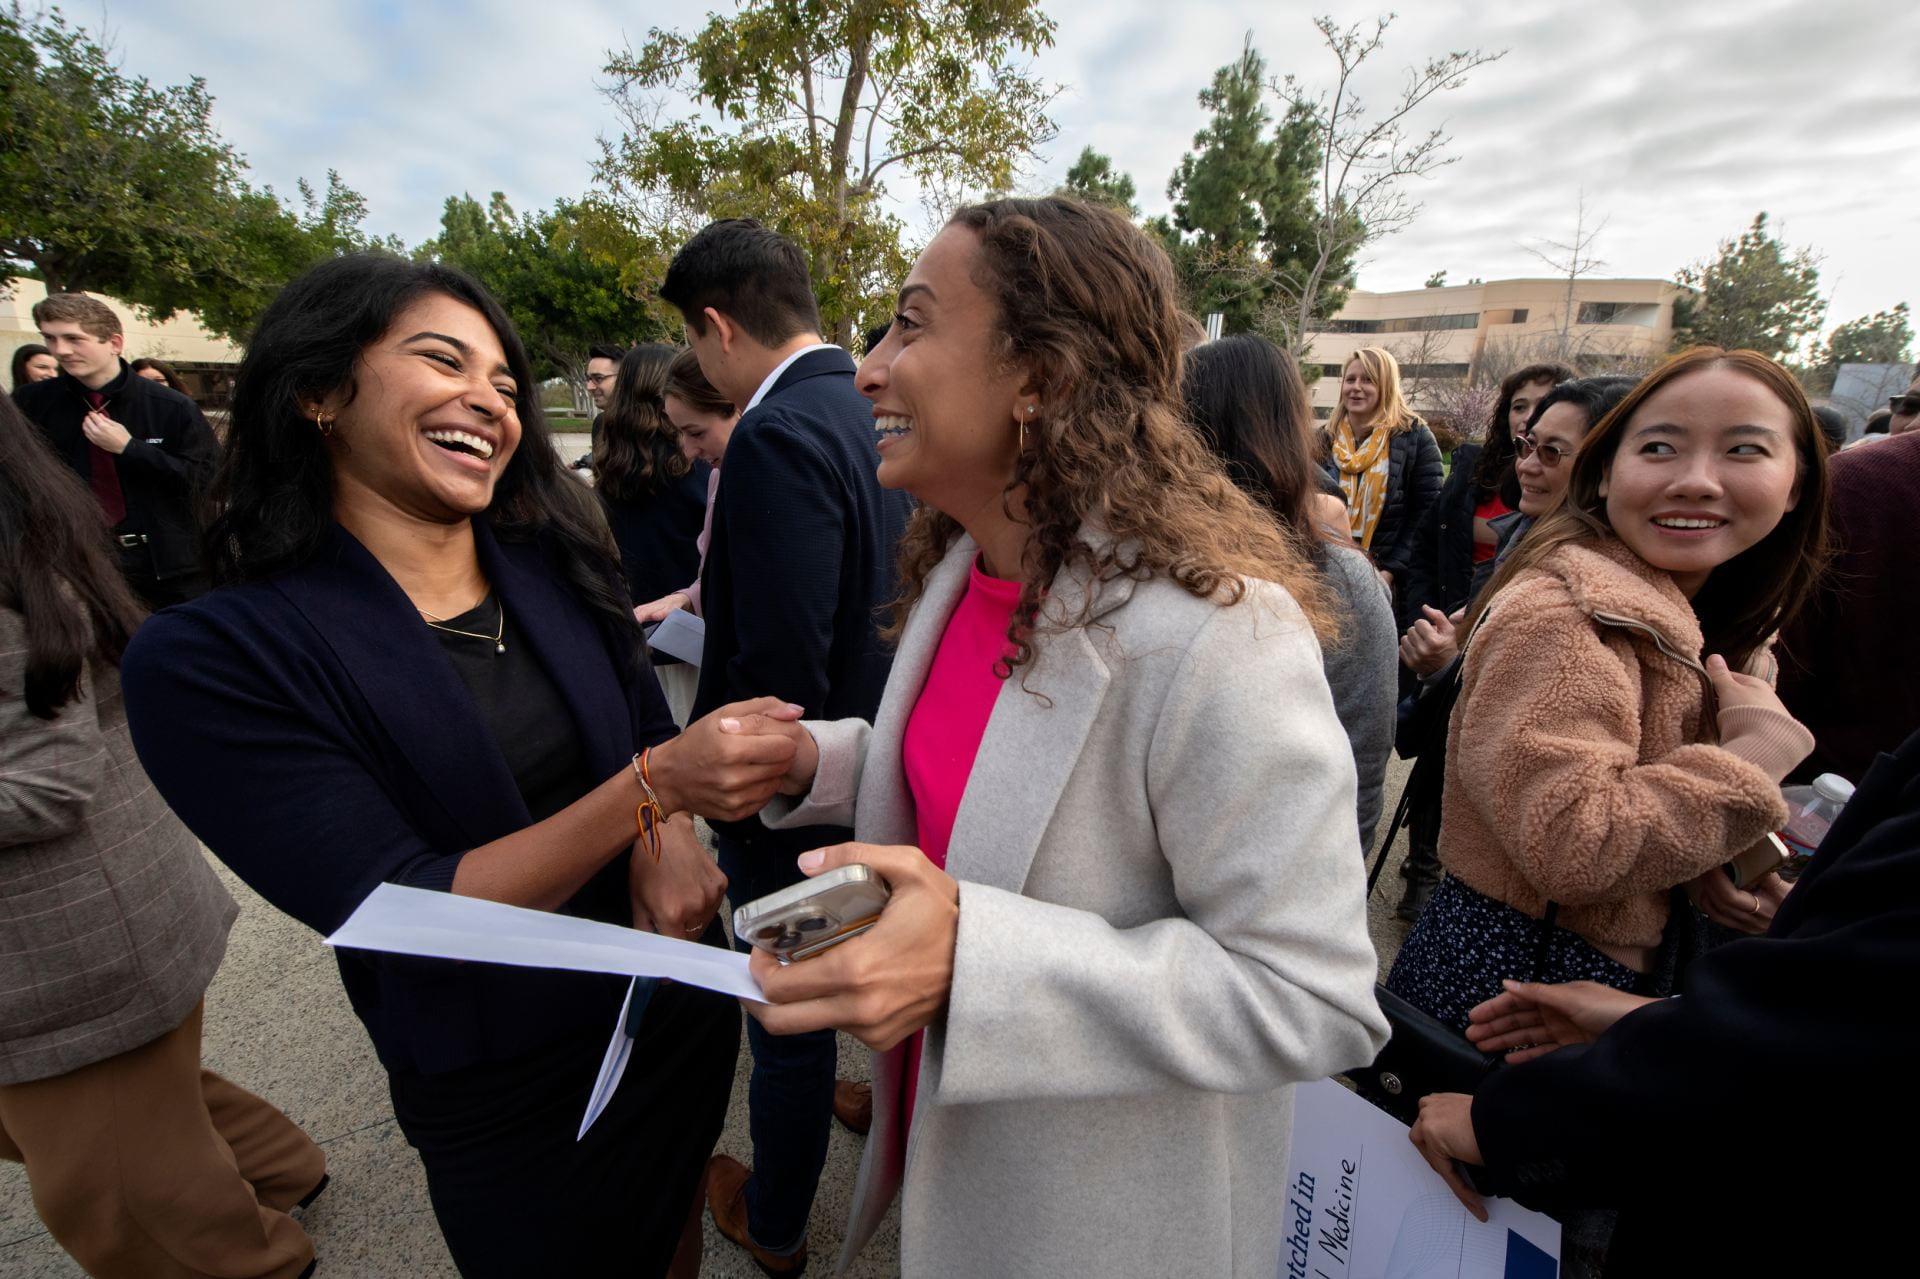 Meril Tomy (left) and fellow medical student Marihan Attiah congratulate each other after learning at UCI’s Match Day ceremony where they’ll serve their residencies.